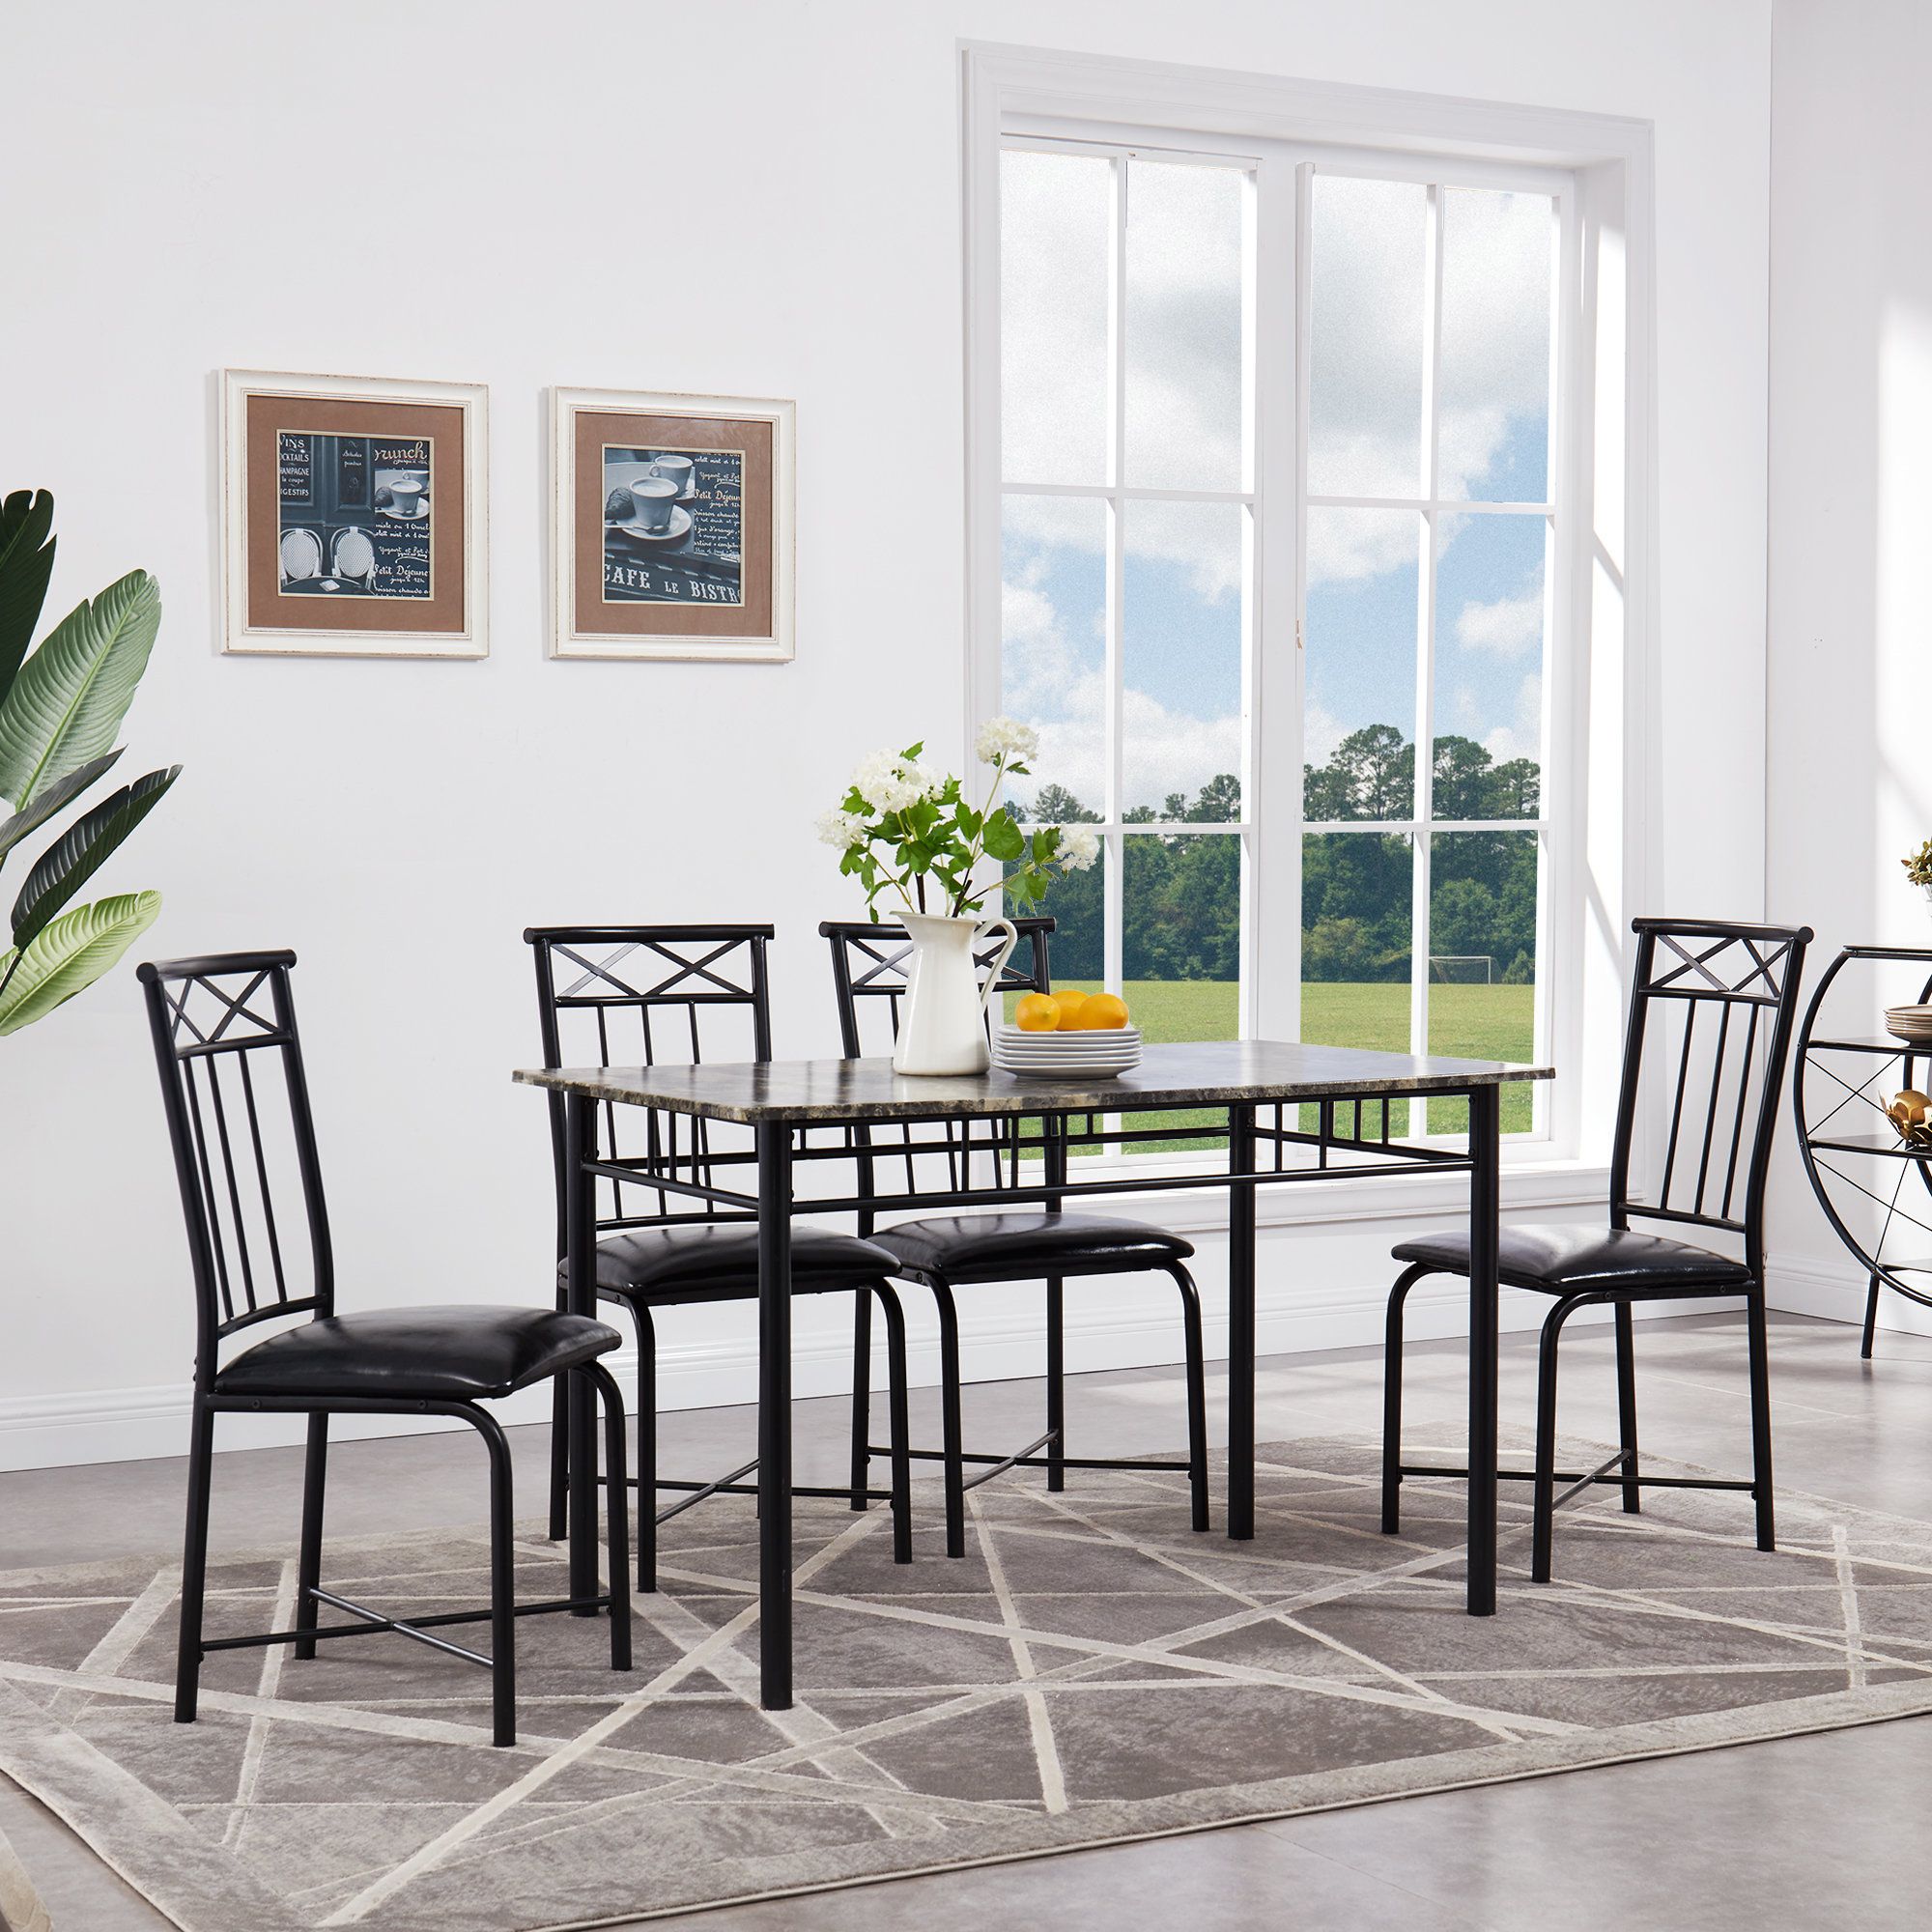 Wayfair Intended For Most Up To Date Taulbee 5 Piece Dining Sets (View 3 of 20)